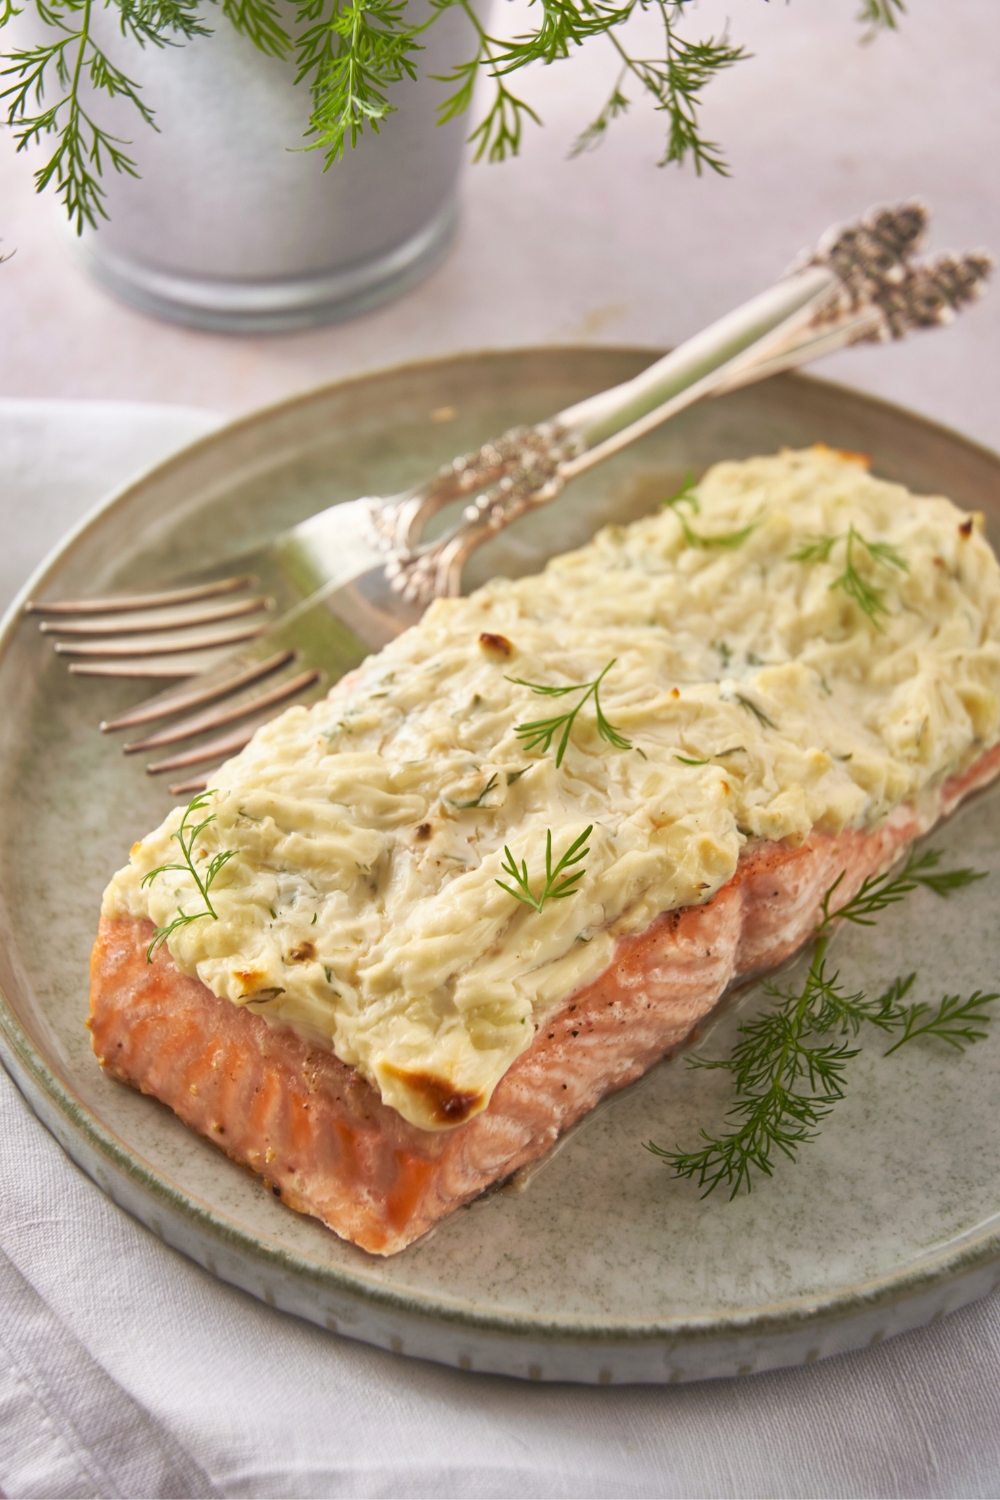 Baked cream cheese and dill on a fillet of salmon on a plate with two forks on it.